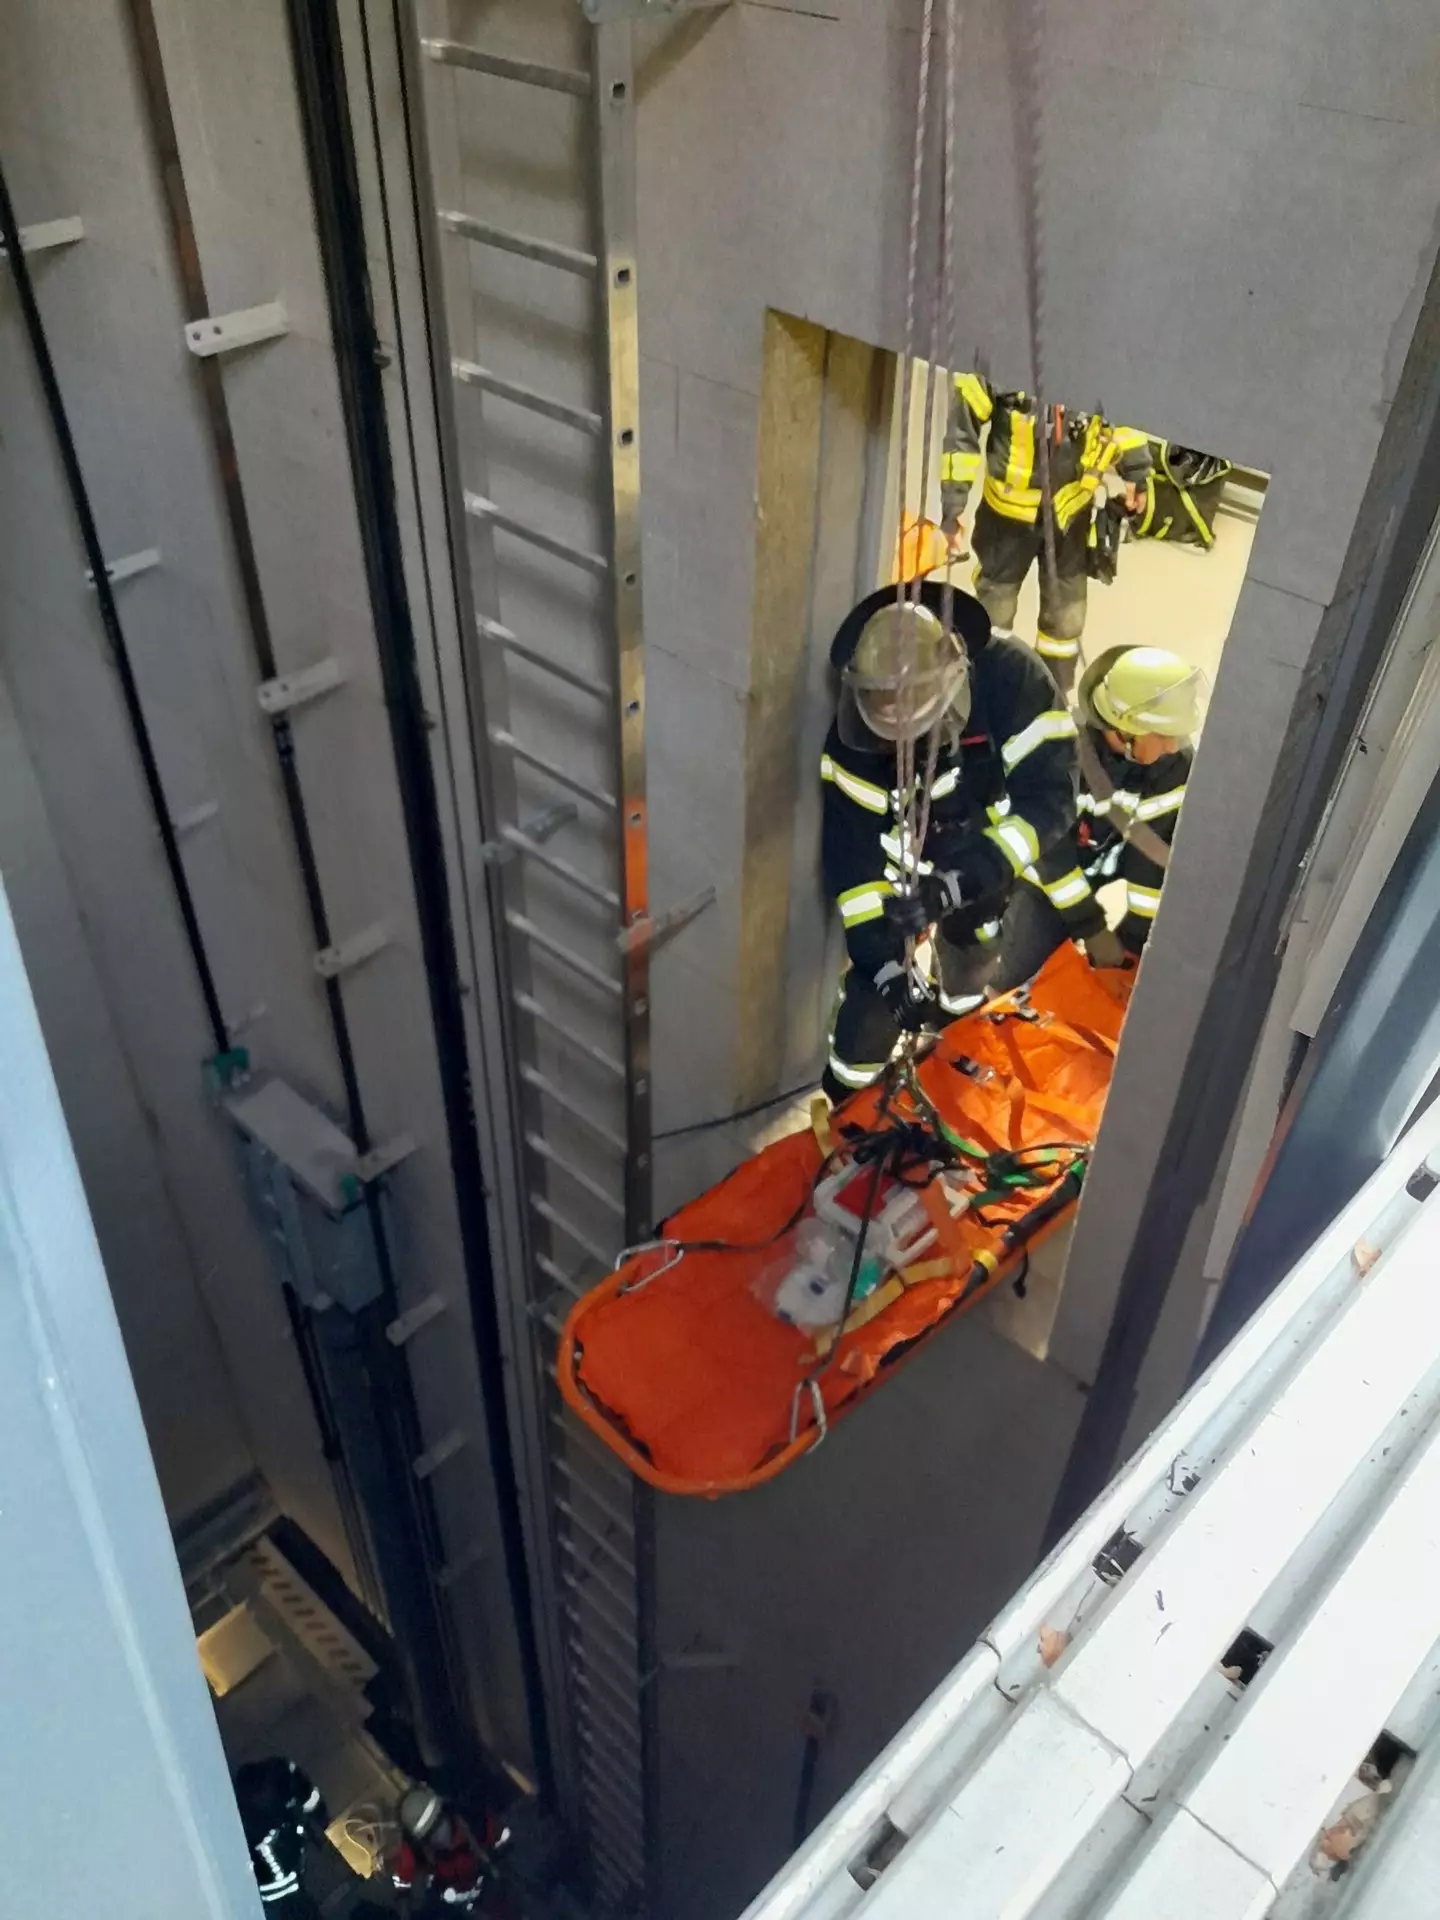 She was plunged a stomach-flipping 35 ft down the lift shaft on Saturday.